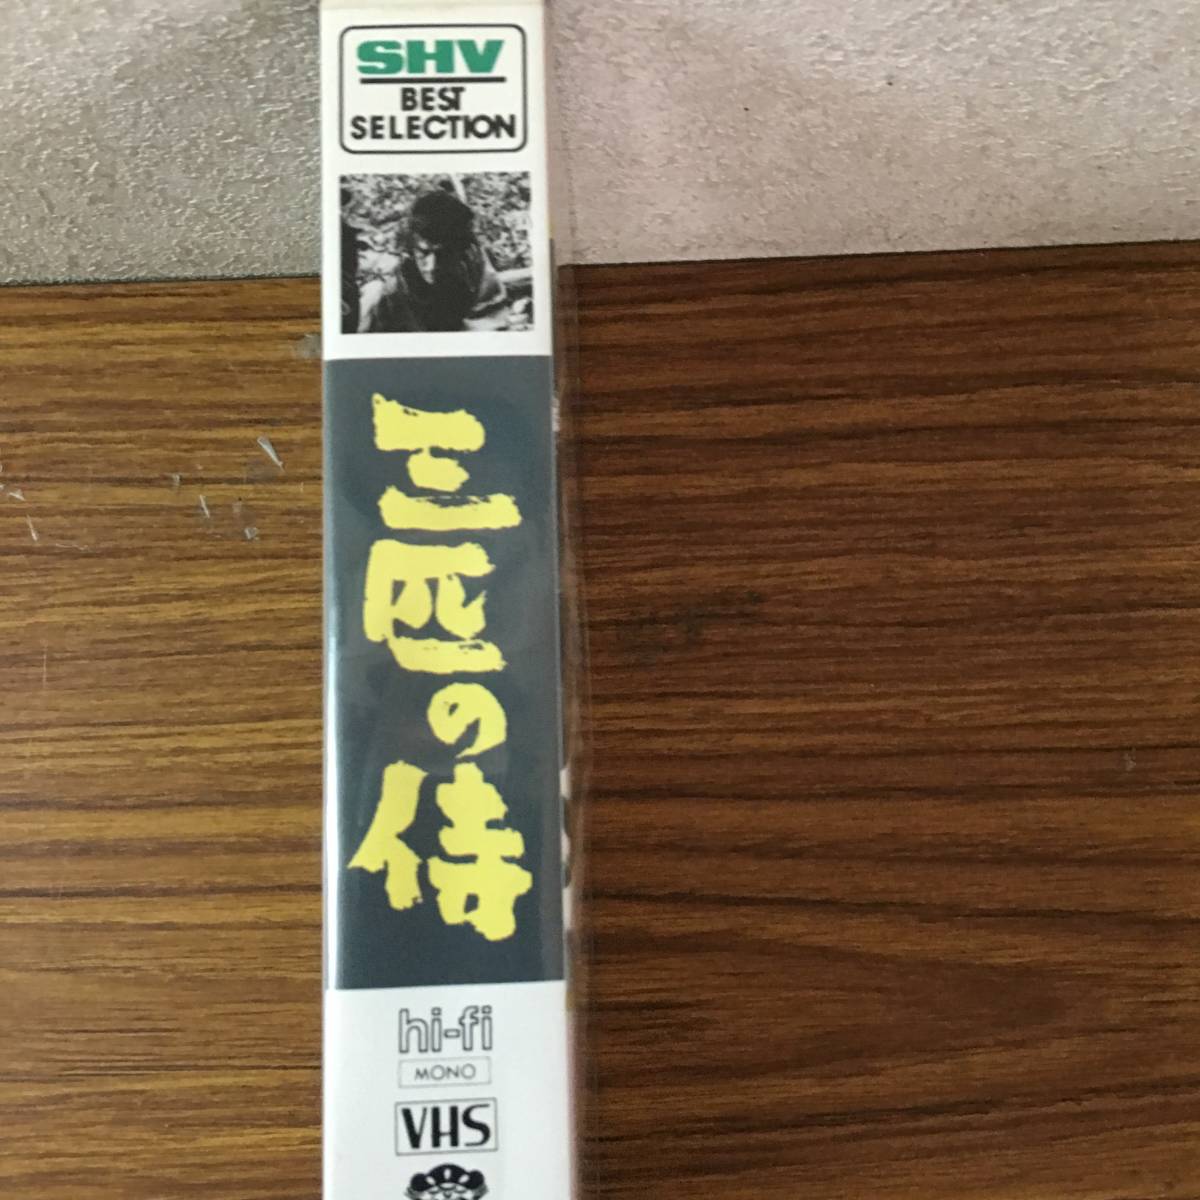  prompt decision VHS video * three pcs. samurai * Tanba ..* mulberry ....*. mountain beautiful .* letter pack post service plus possibility 